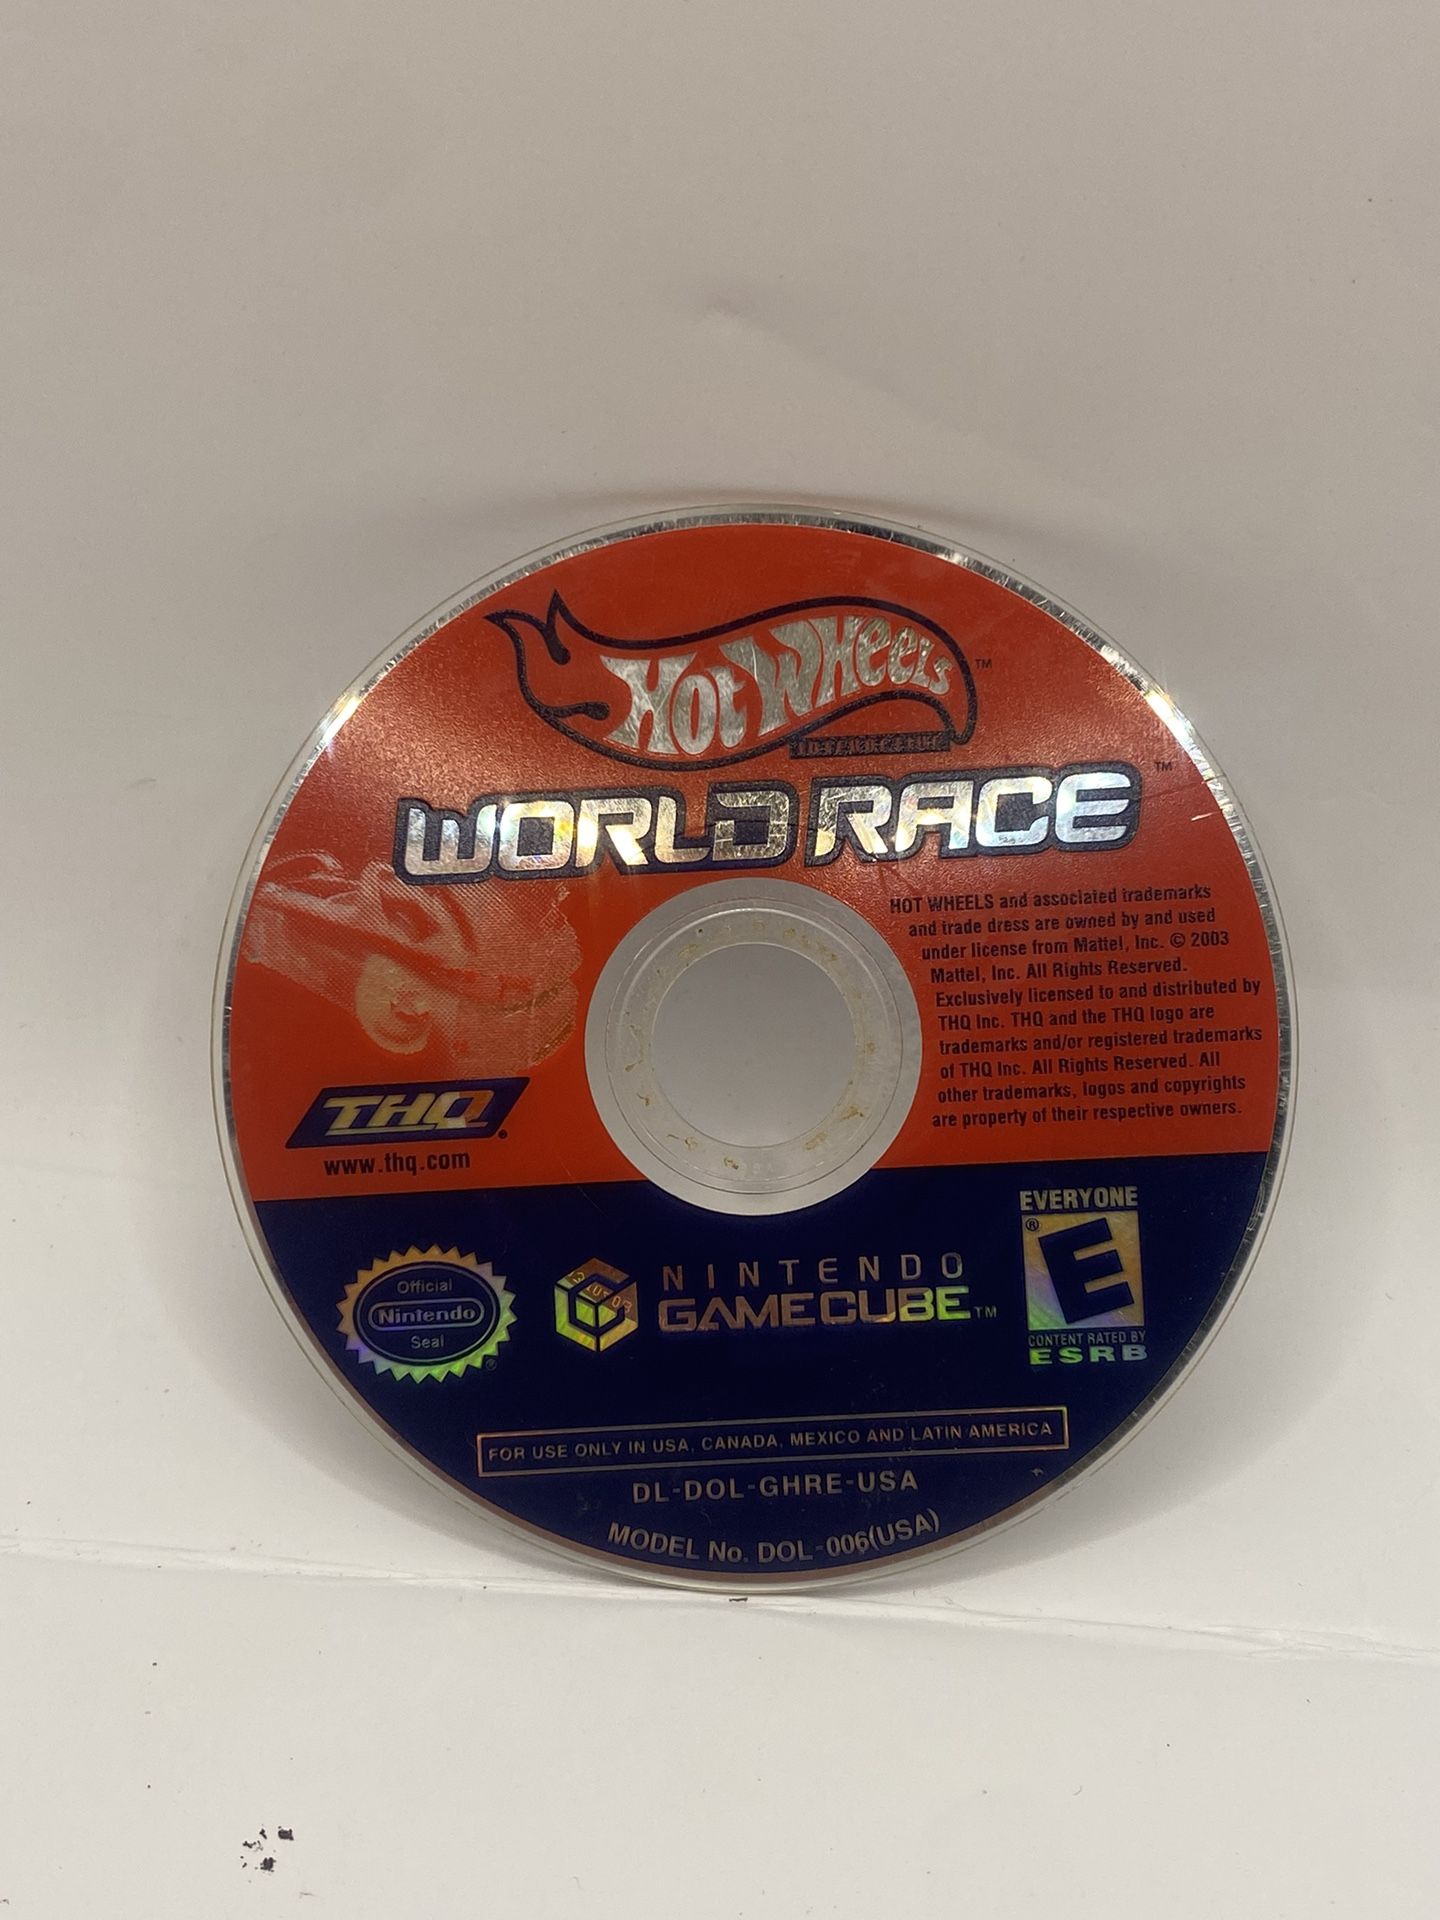 Hot Wheels World Race (2003)  Nintendo GameCube  Disc Only  Tested Authentic